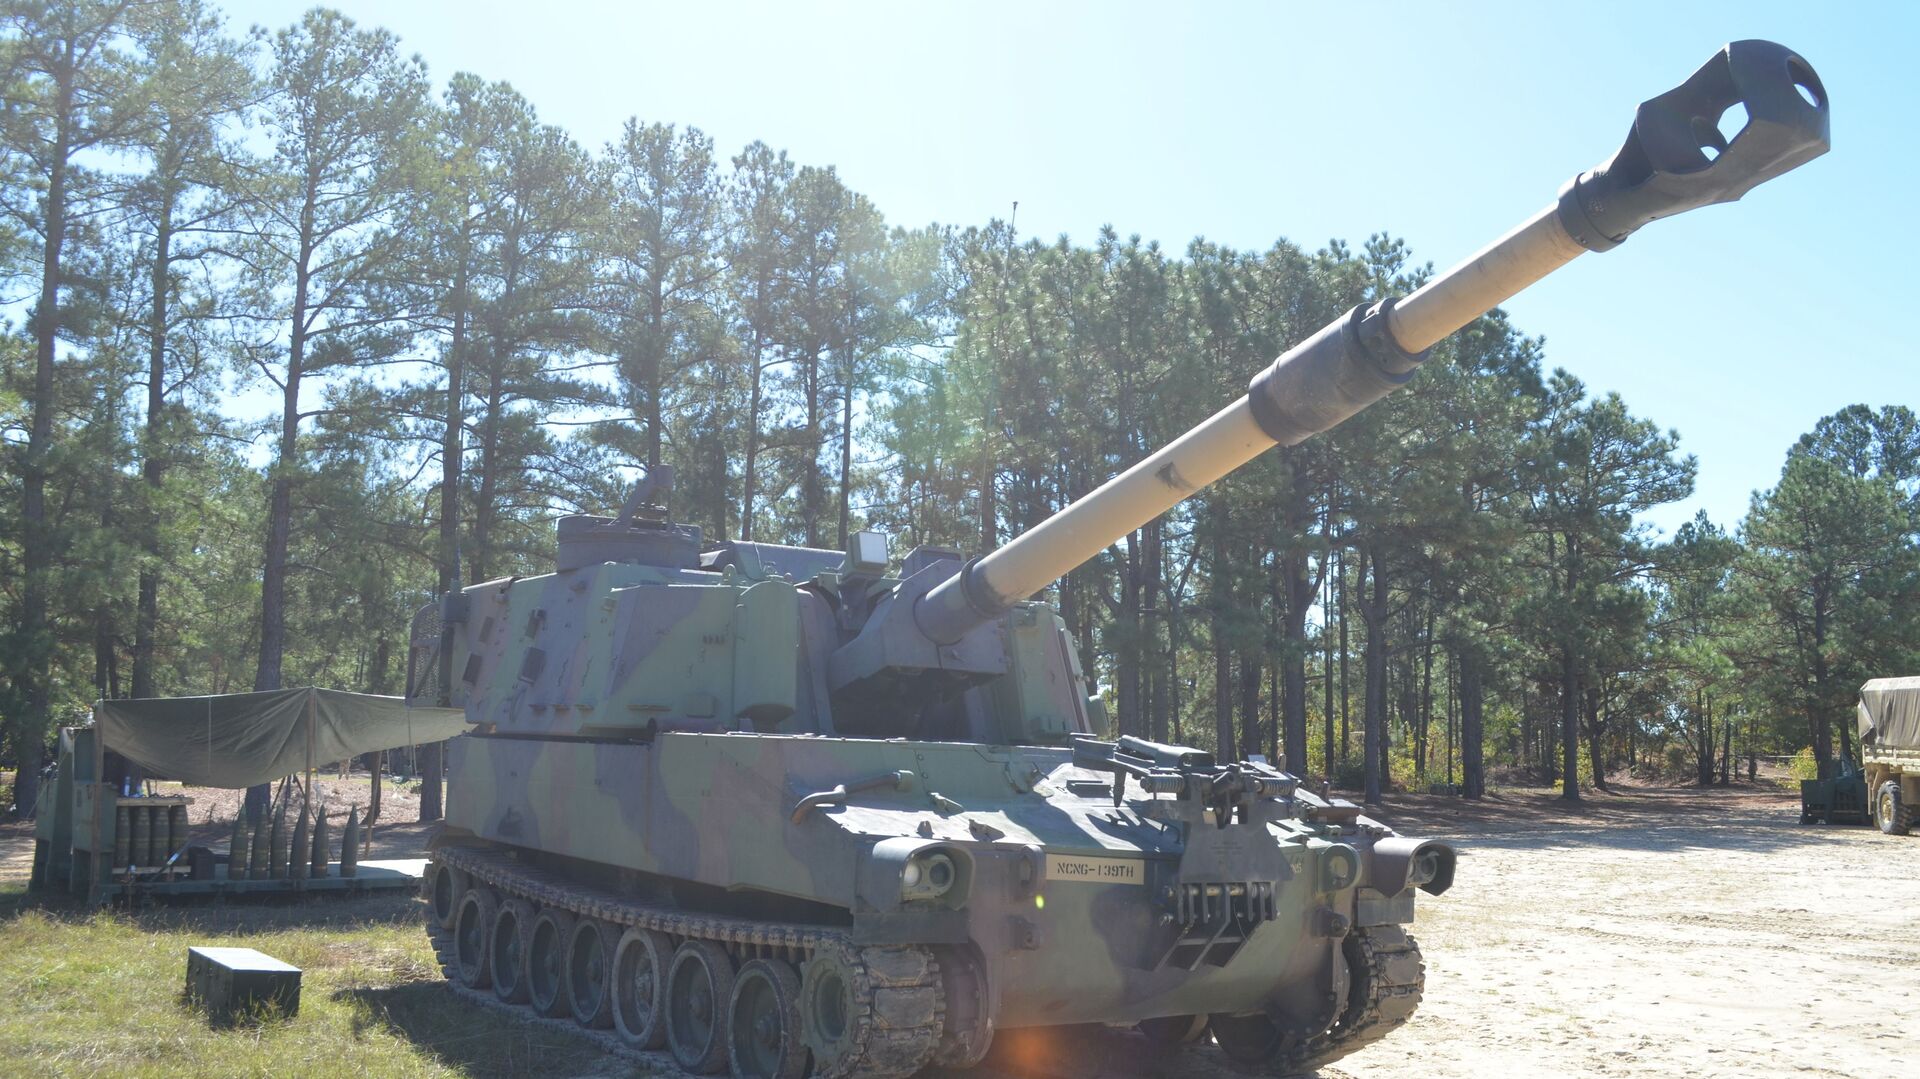 The M109 Paladin Self-Propelled Howitzer standing ready deep in the southern training areas at Fort Bragg. Nine National Guard troops from North and South Carolina, Florida, Georgia, Mississippi, Illinois and New Jersey are attending the 13 Bravo artillery military occupational specialty (MOS) reclassification course and will learn how to be a crew member on the three main “cannon” artillery weapons systems in the U.S. Army: The M119A3 105mm light towed howitzer, M777A2 155mm medium towed howitzer and the M109A6 Paladin 155mm self-propelled howitzer. Over the course of two days in the field, students will fire hundreds of rounds from all three weapons. - Sputnik International, 1920, 25.05.2022